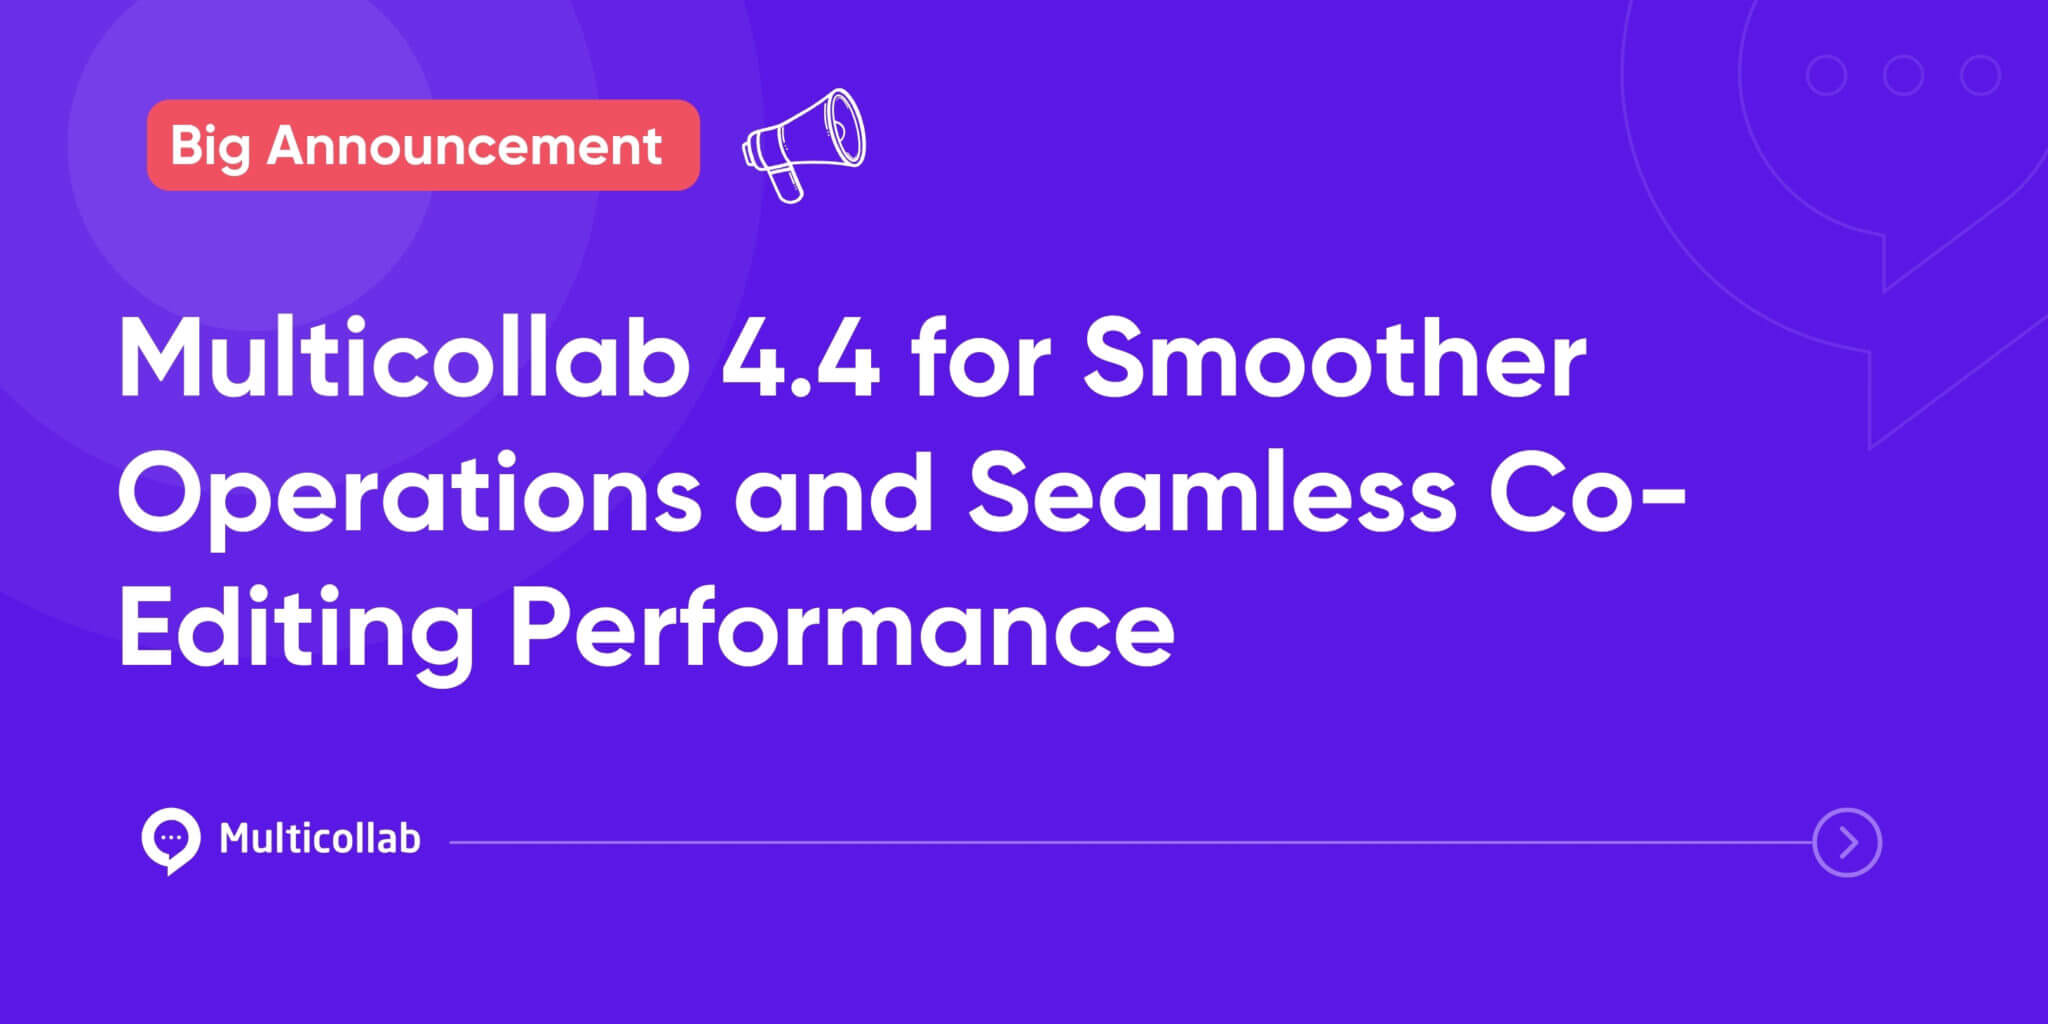 Multicollab 4.4 for Smoother Operations and Seamless Co-Editing Performance